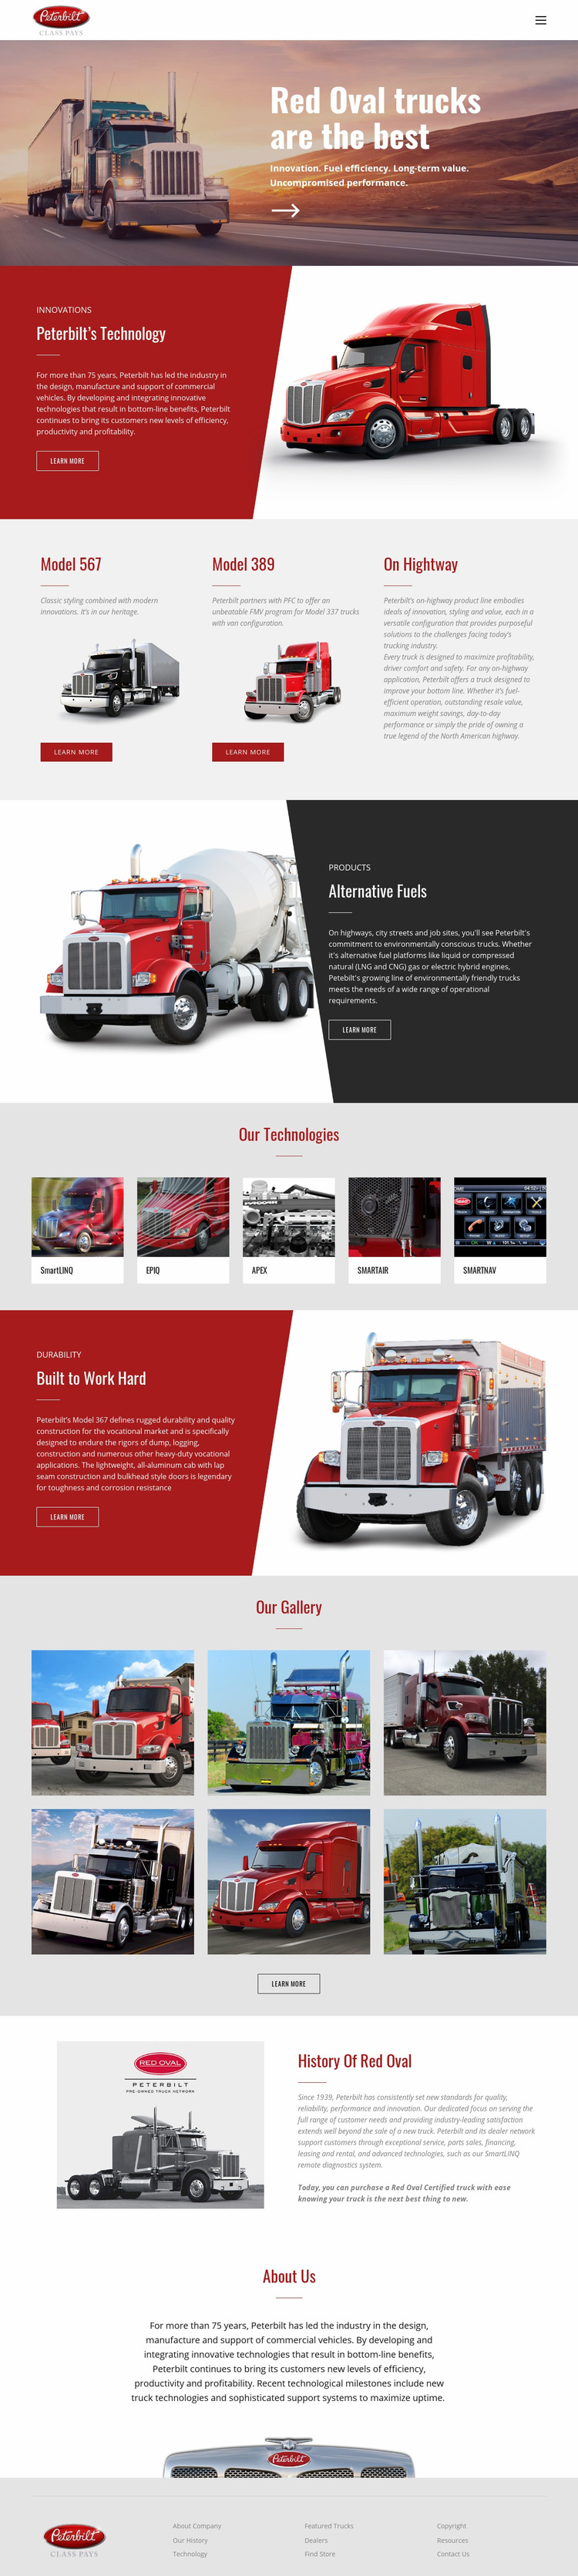 Red oval truck transportaion Web Page Design